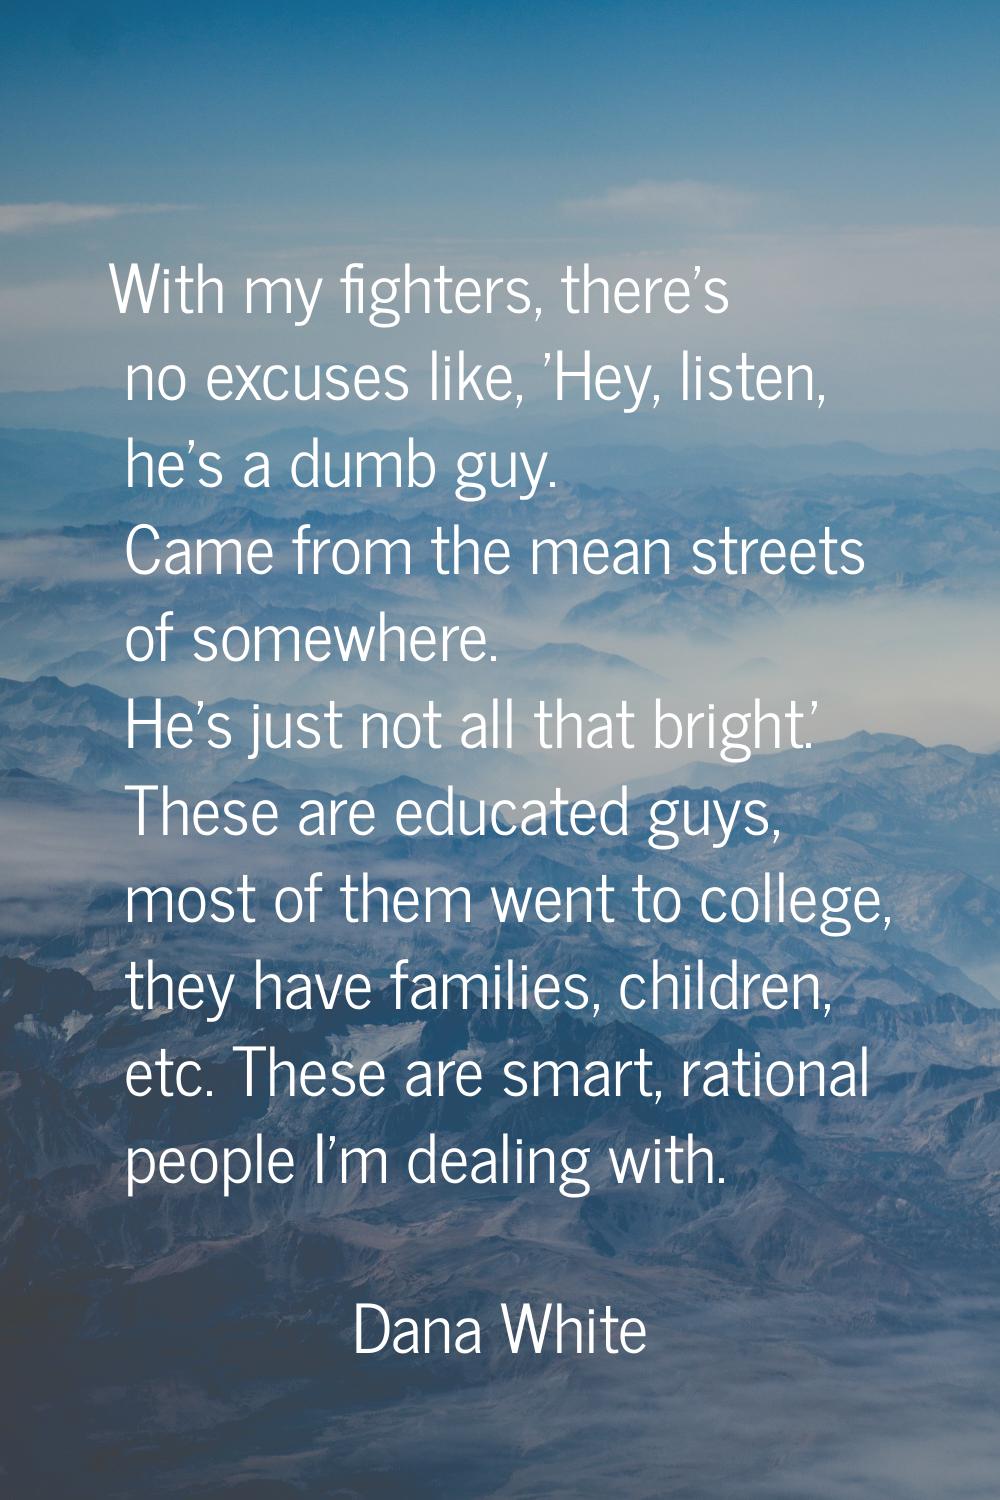 With my fighters, there's no excuses like, 'Hey, listen, he's a dumb guy. Came from the mean street